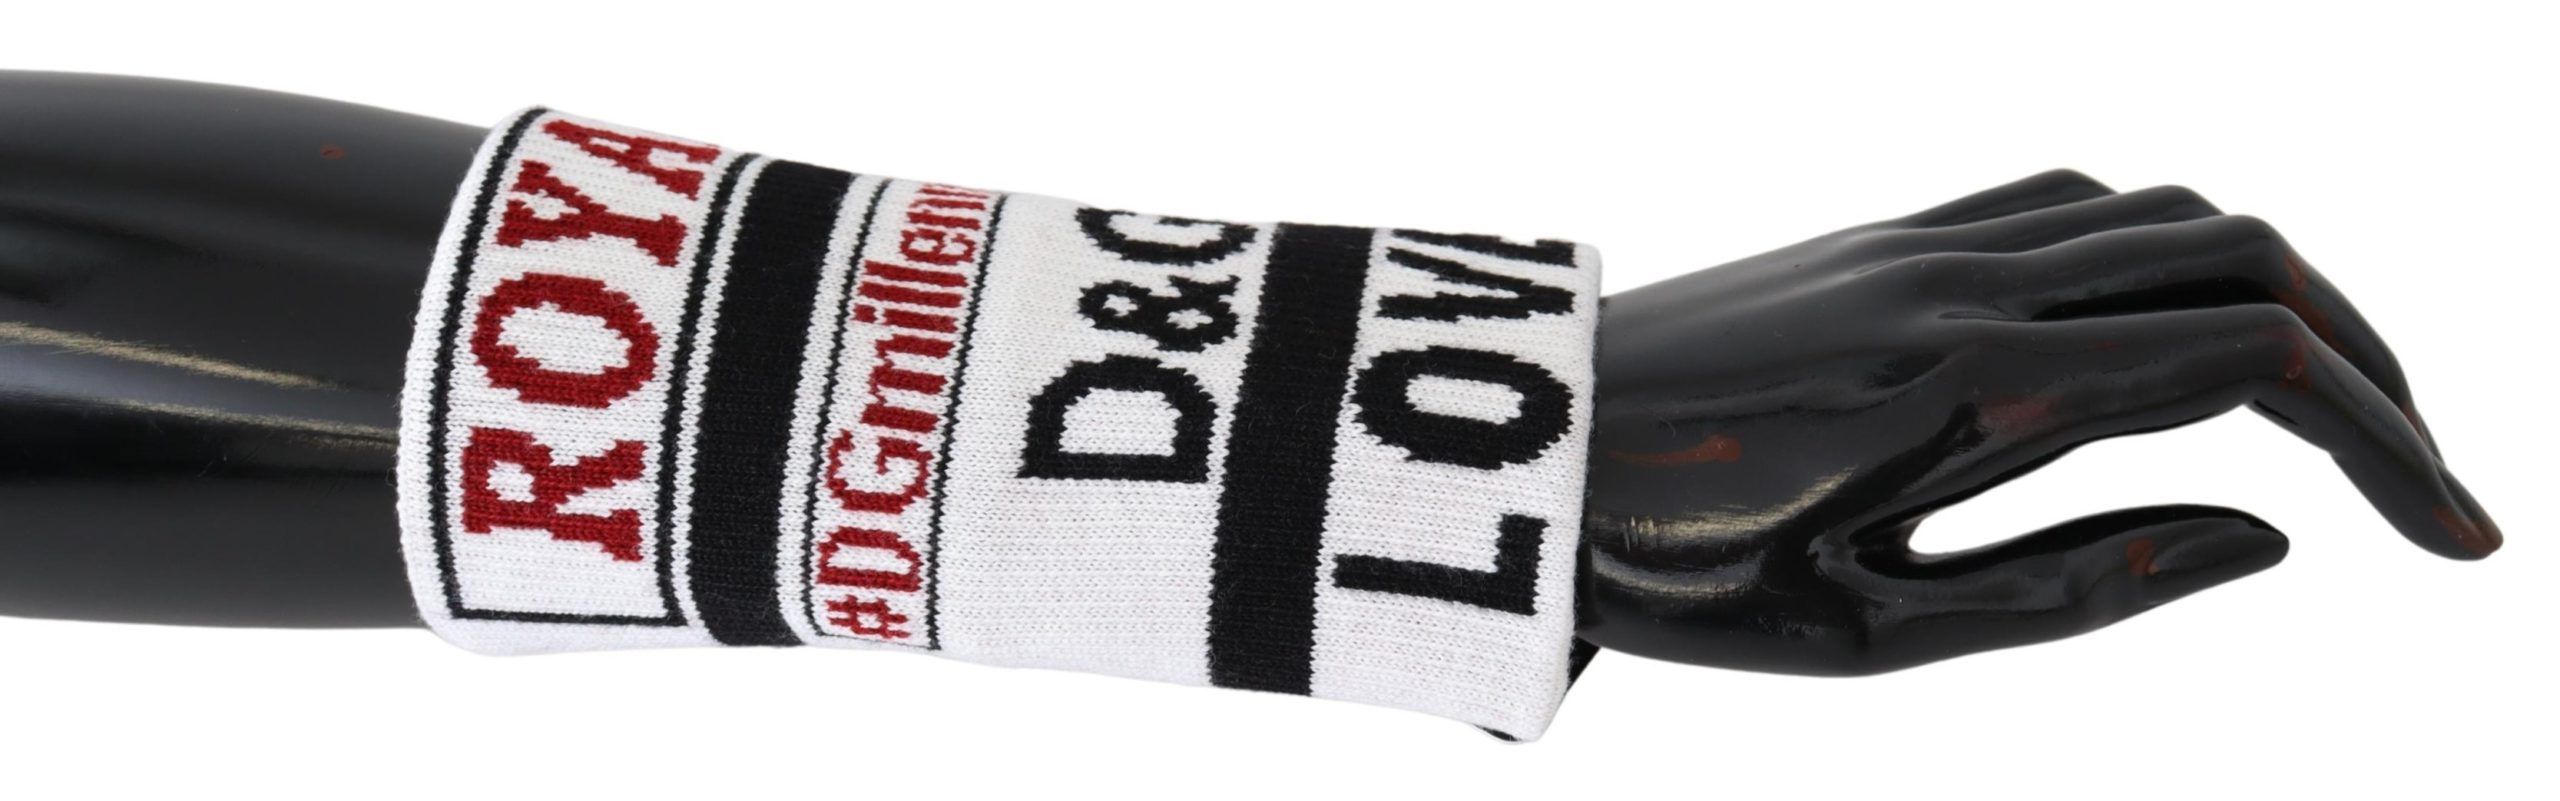 Multicolor Wool Knit D&G Love Wristband Wrap